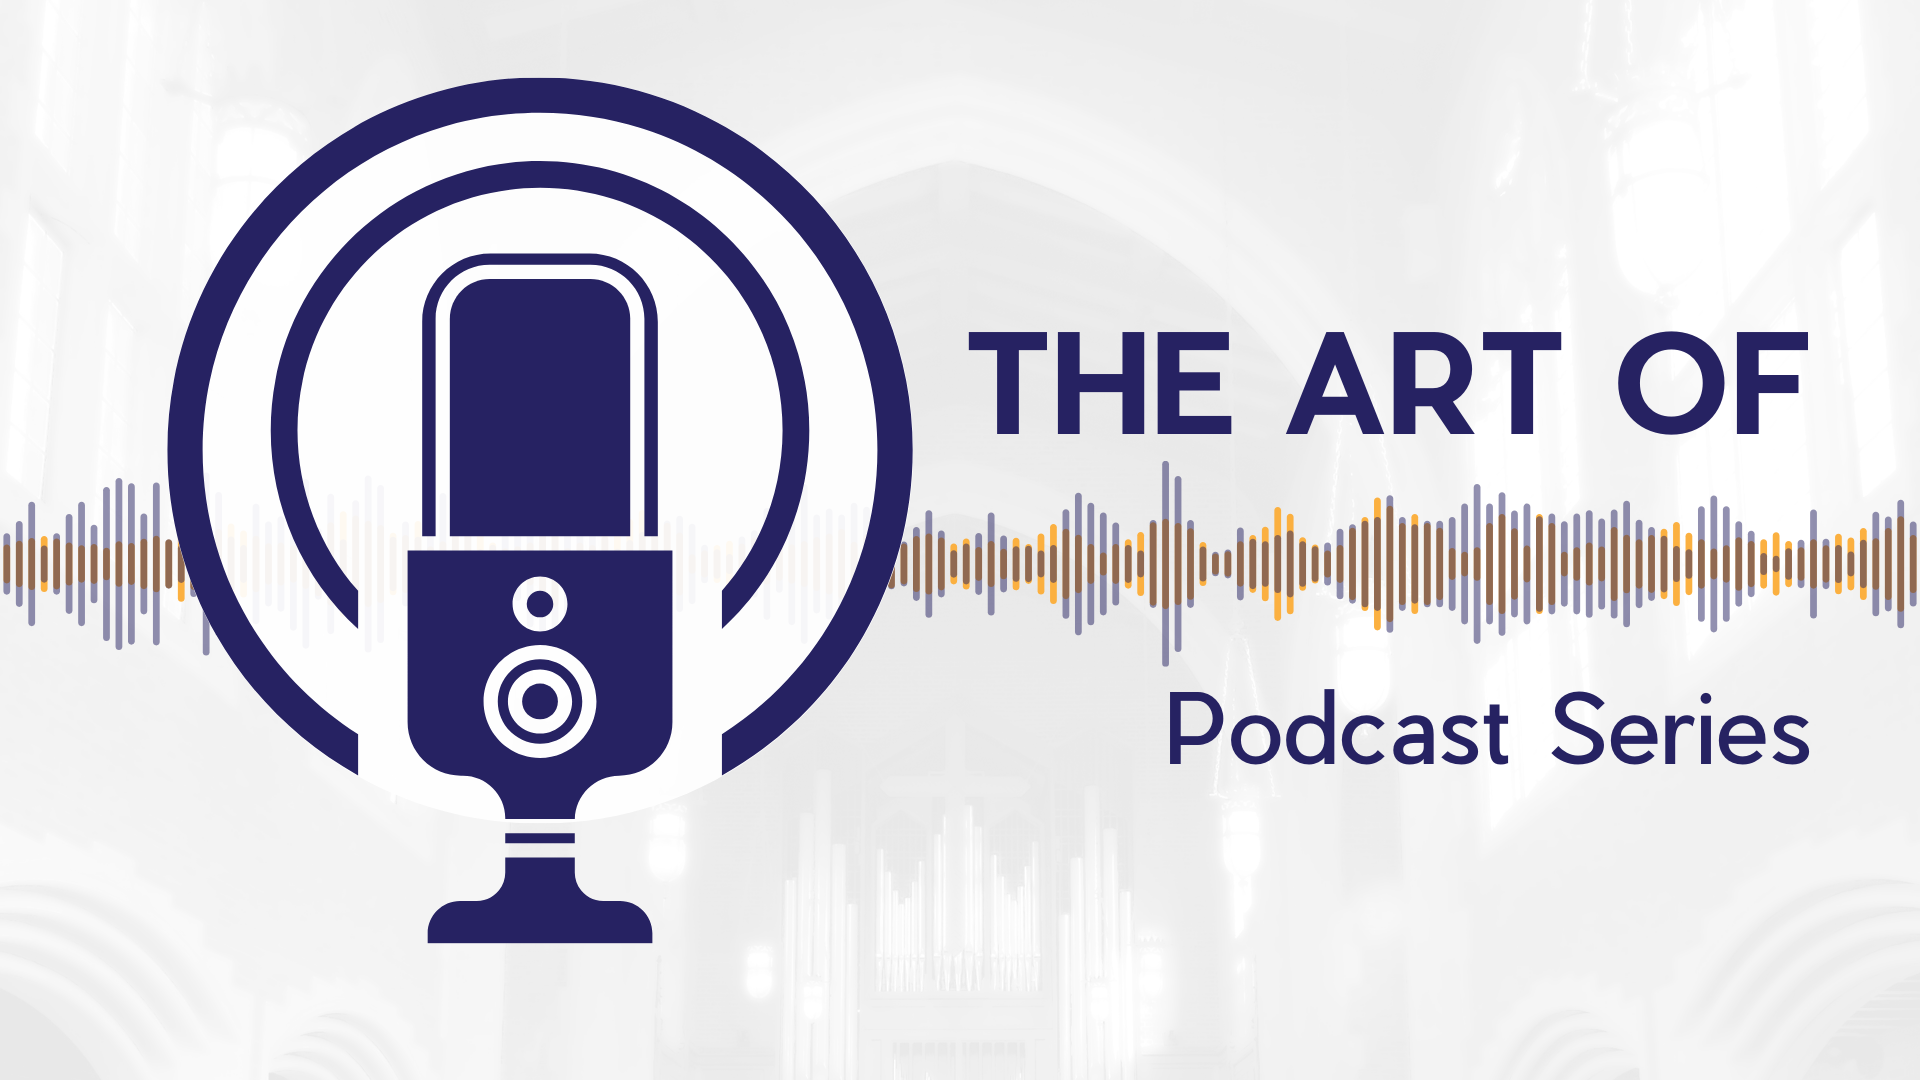 The Art Of Podcast Series